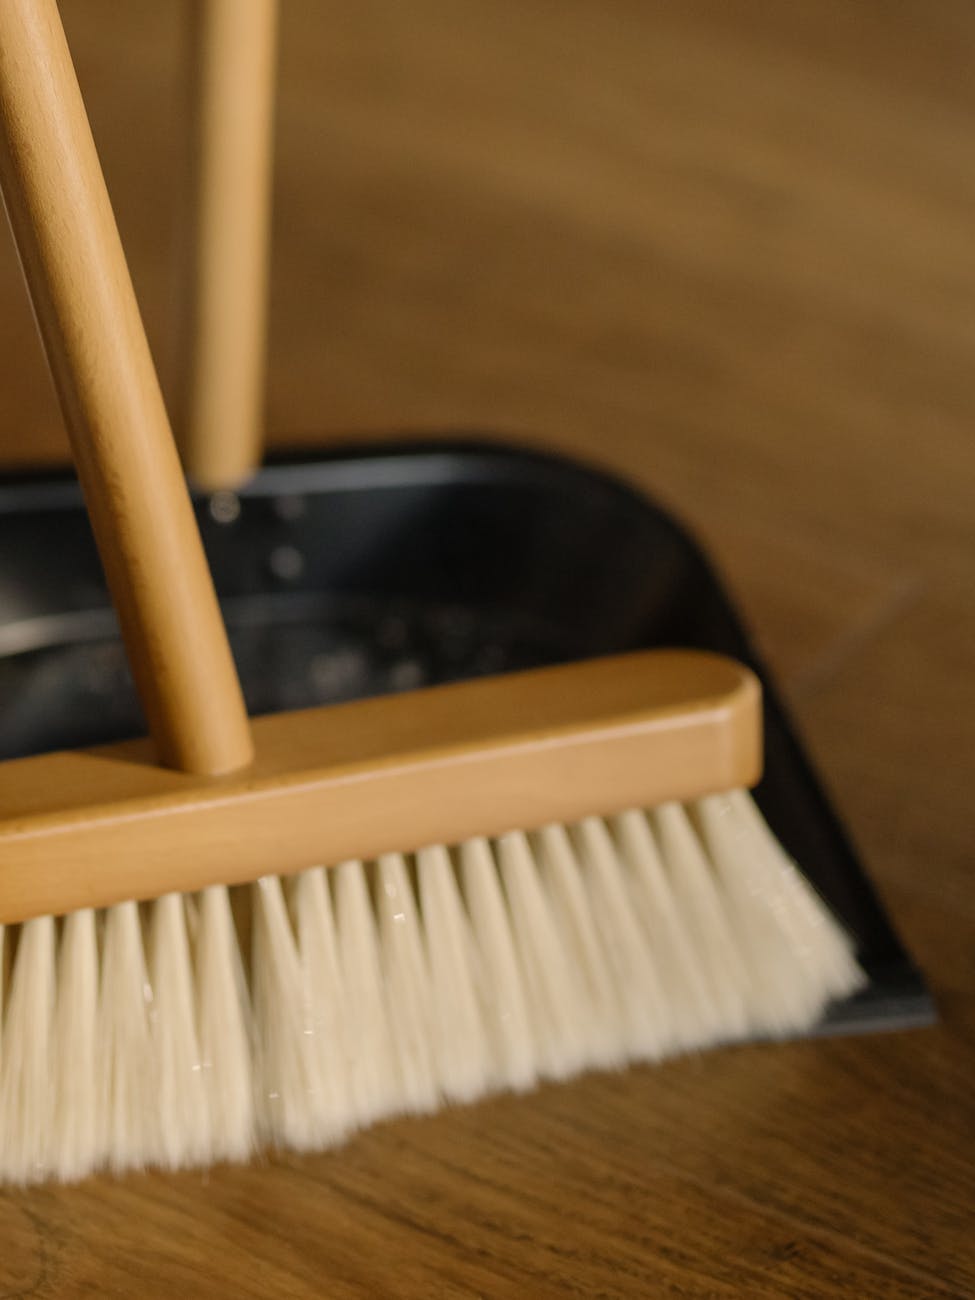 brown wooden brush on black plastic container